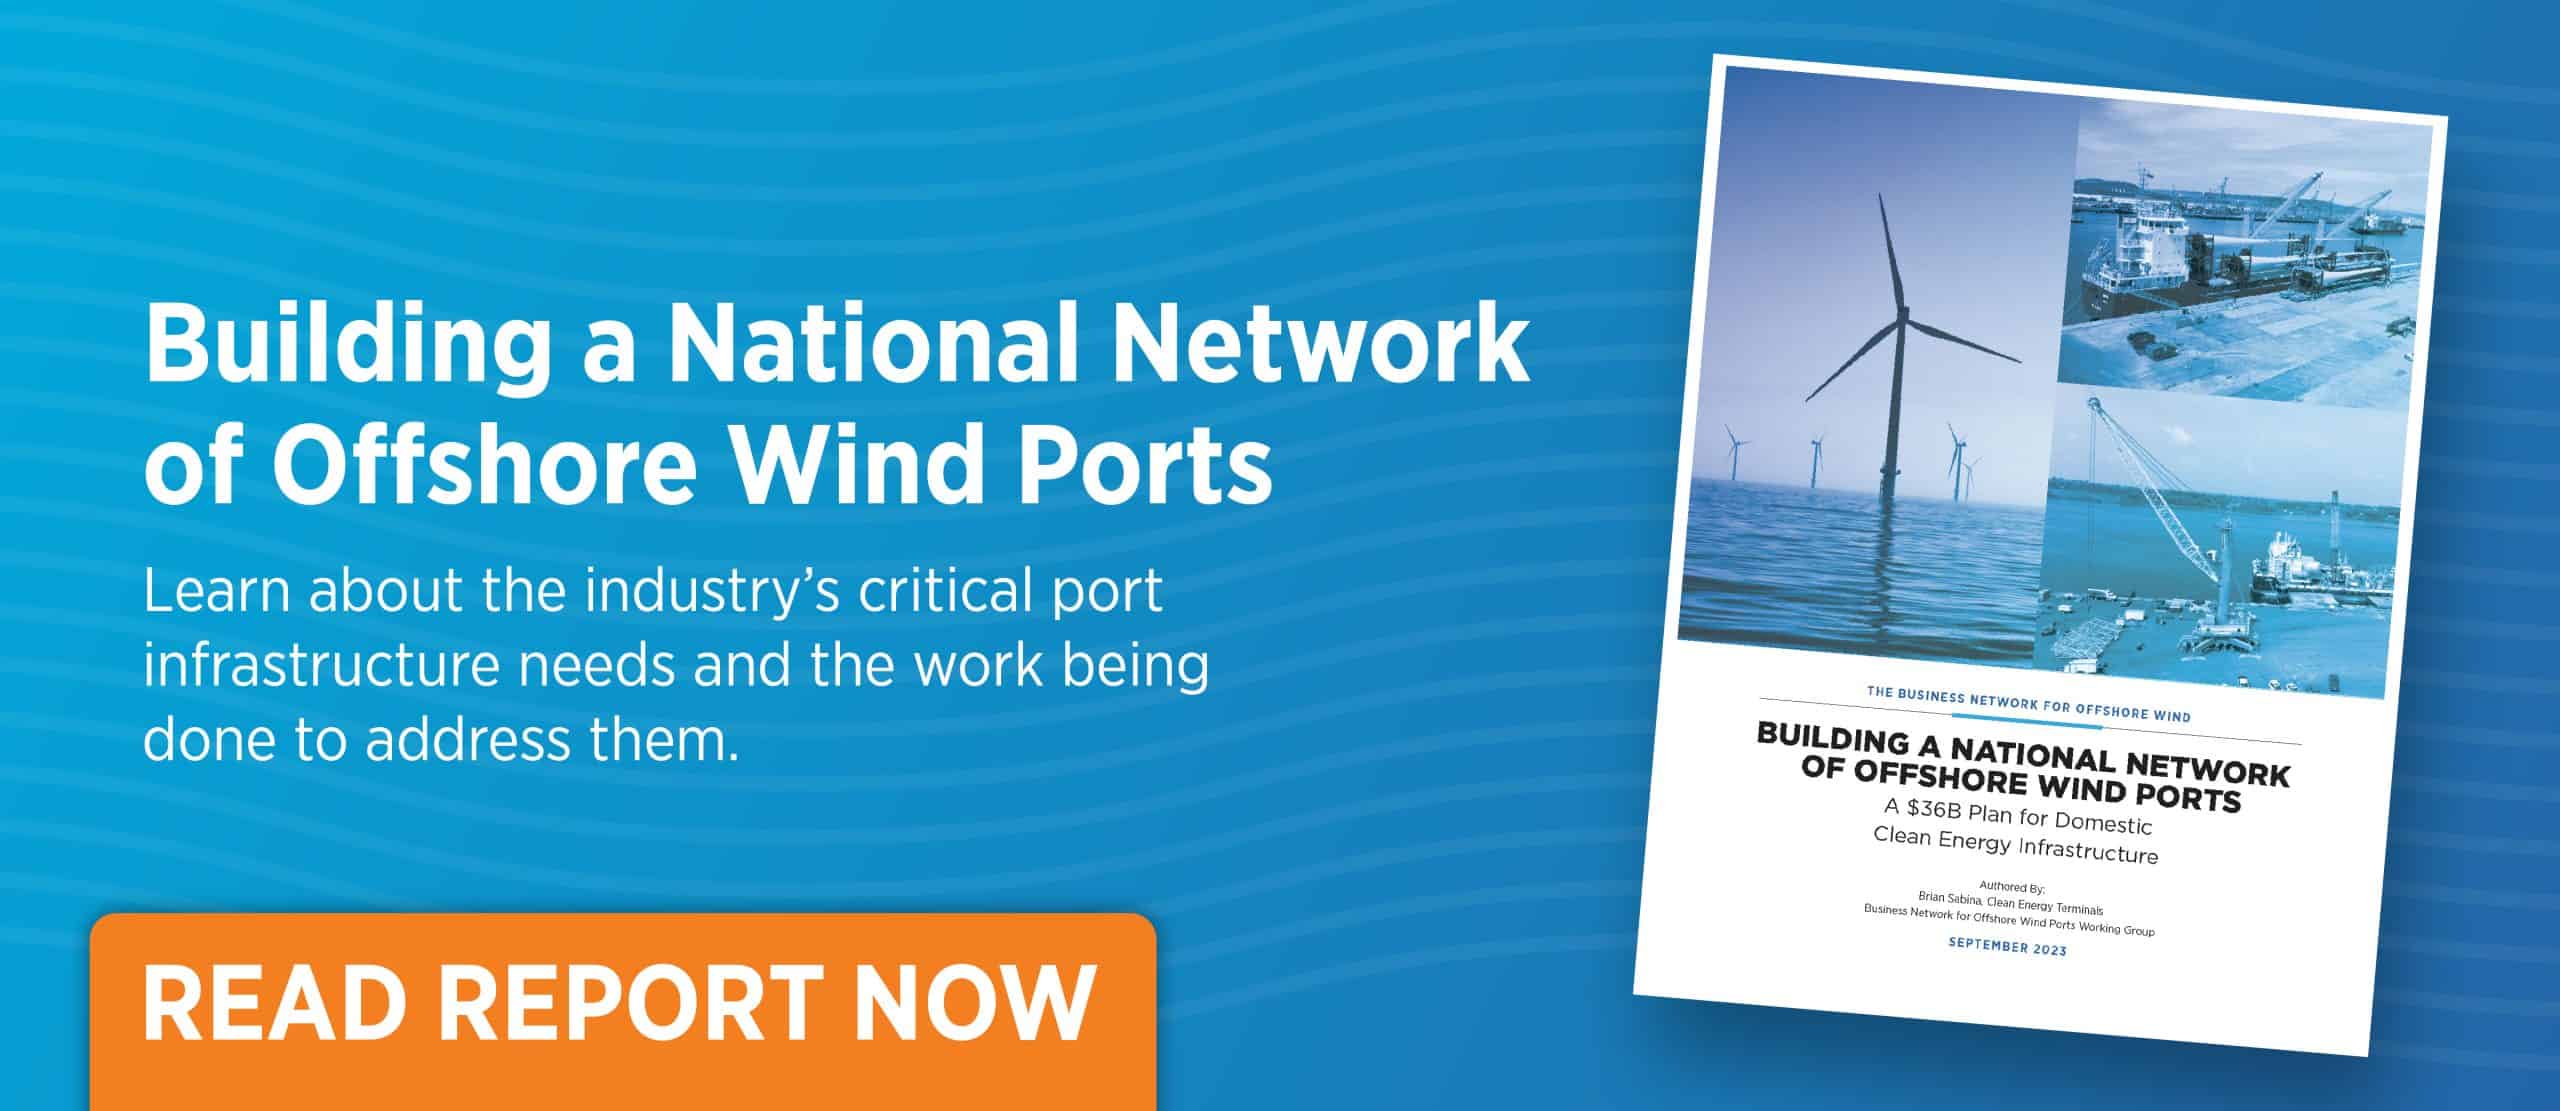 Building  National Network of Offshore Wind Ports